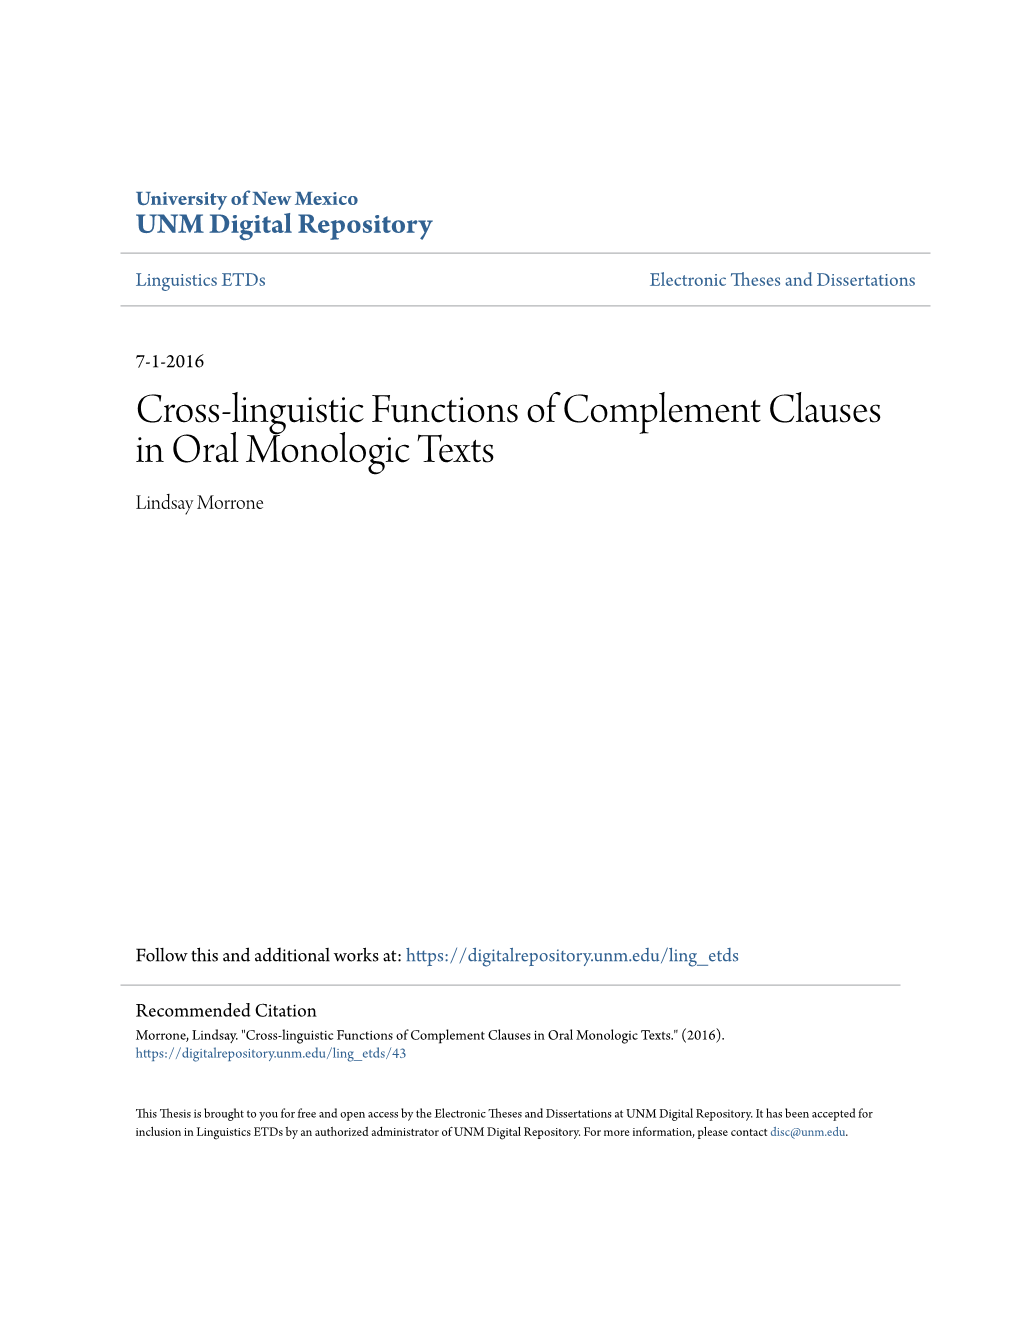 Cross-Linguistic Functions of Complement Clauses in Oral Monologic Texts Lindsay Morrone